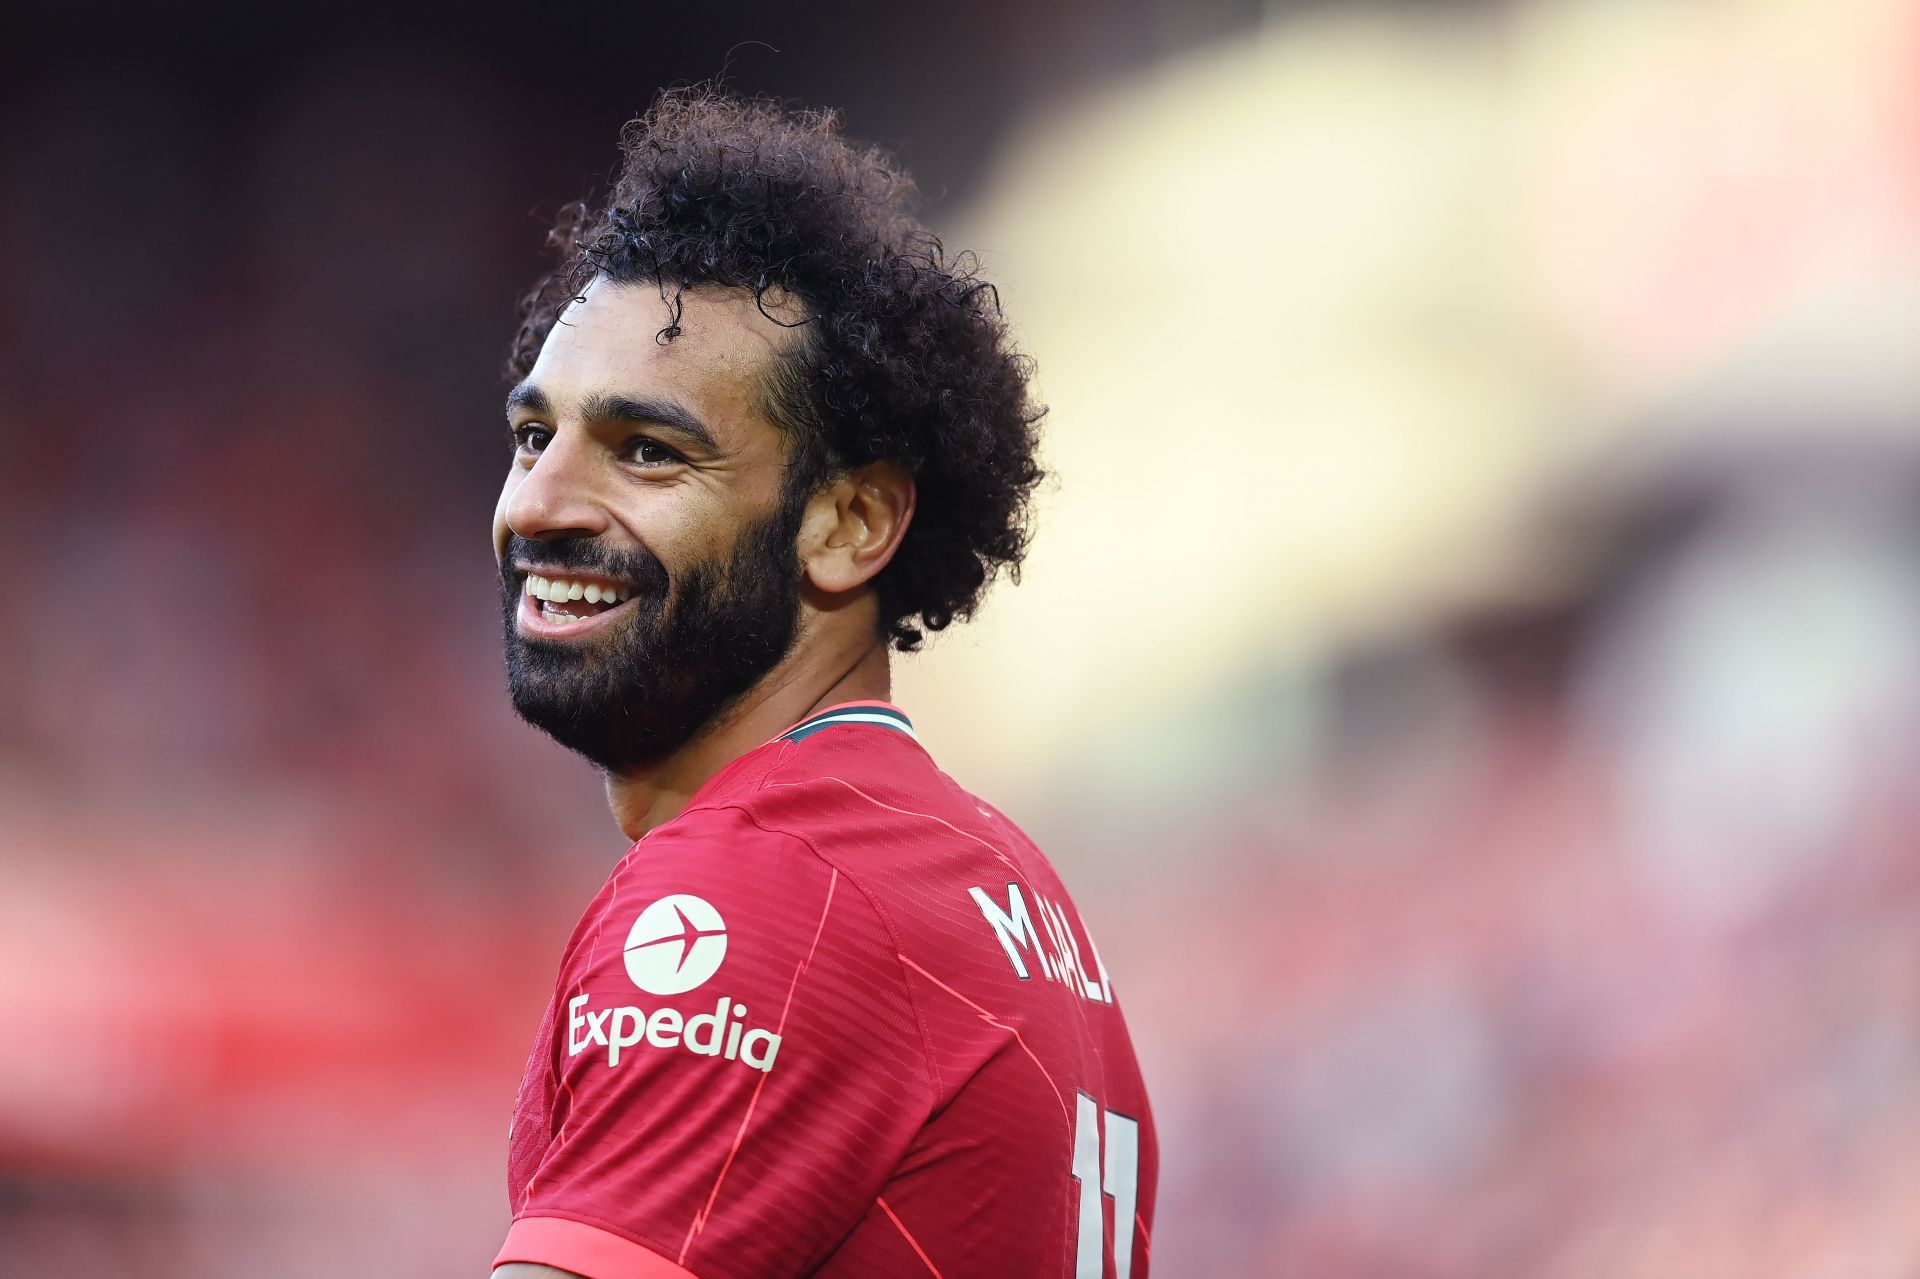 Mohamed Salah recently signed a new contract at Liverpool